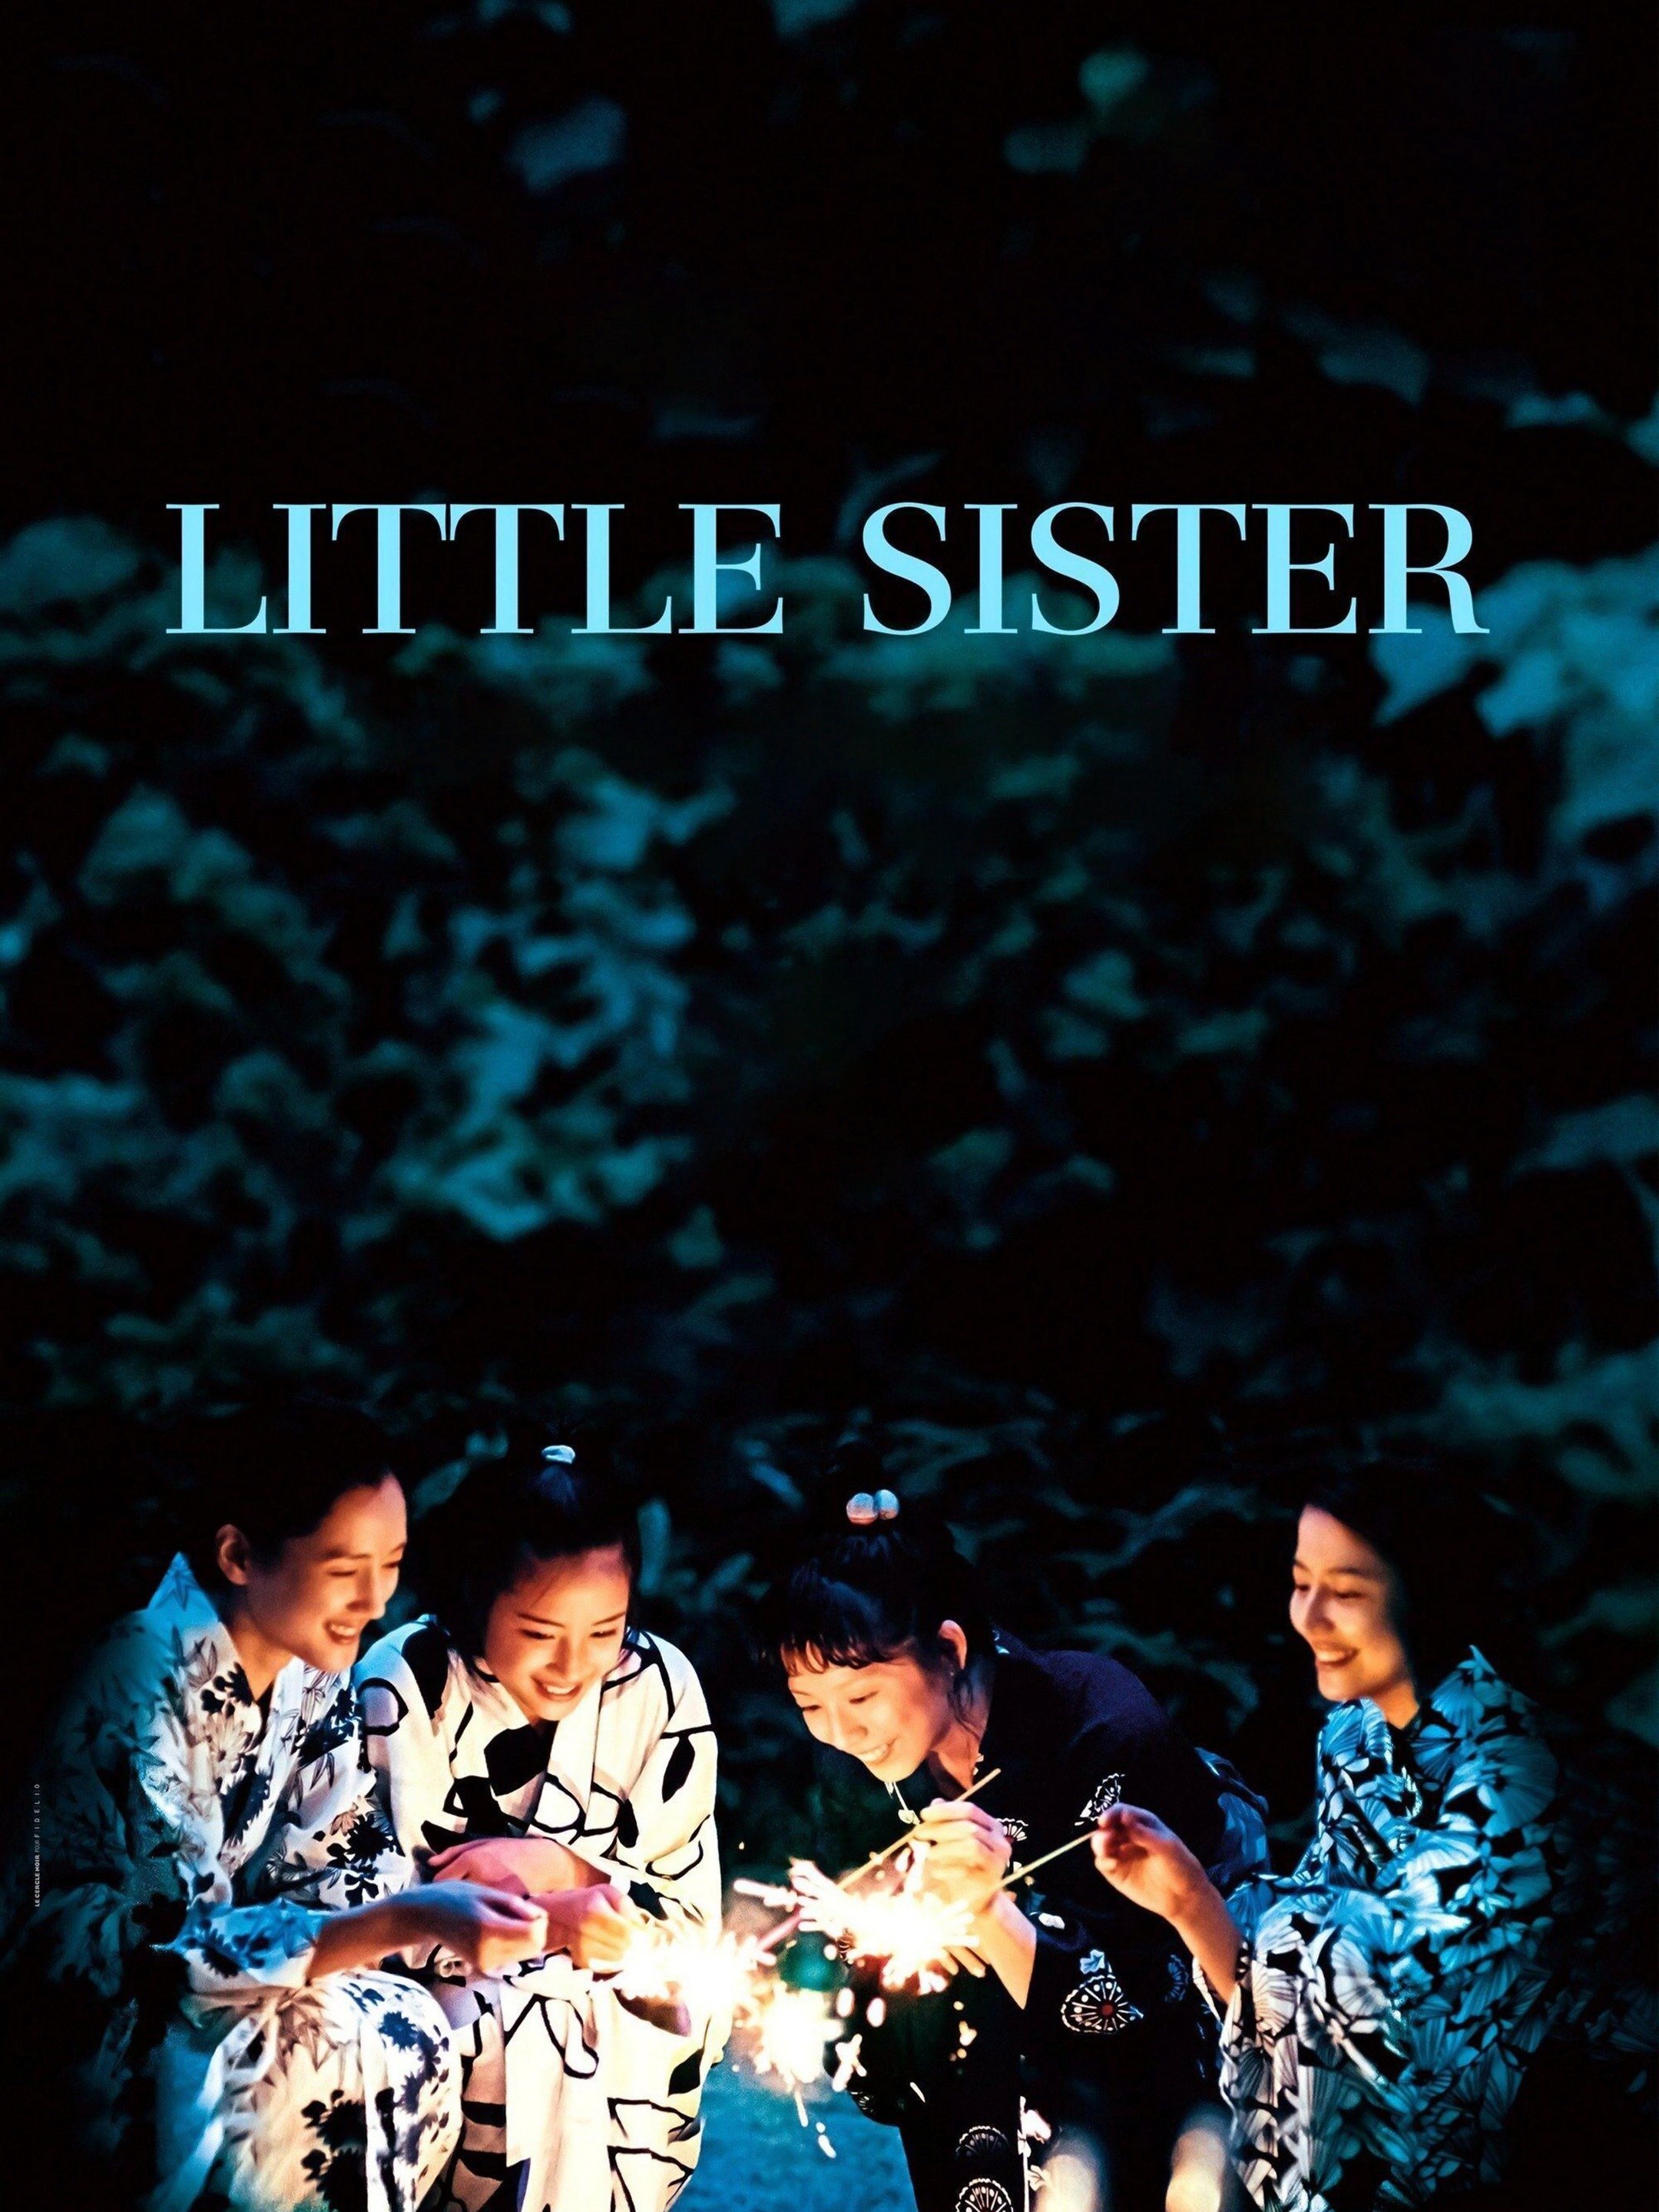 Sister Blackmail Brother Dvd - Little Sister - Rotten Tomatoes